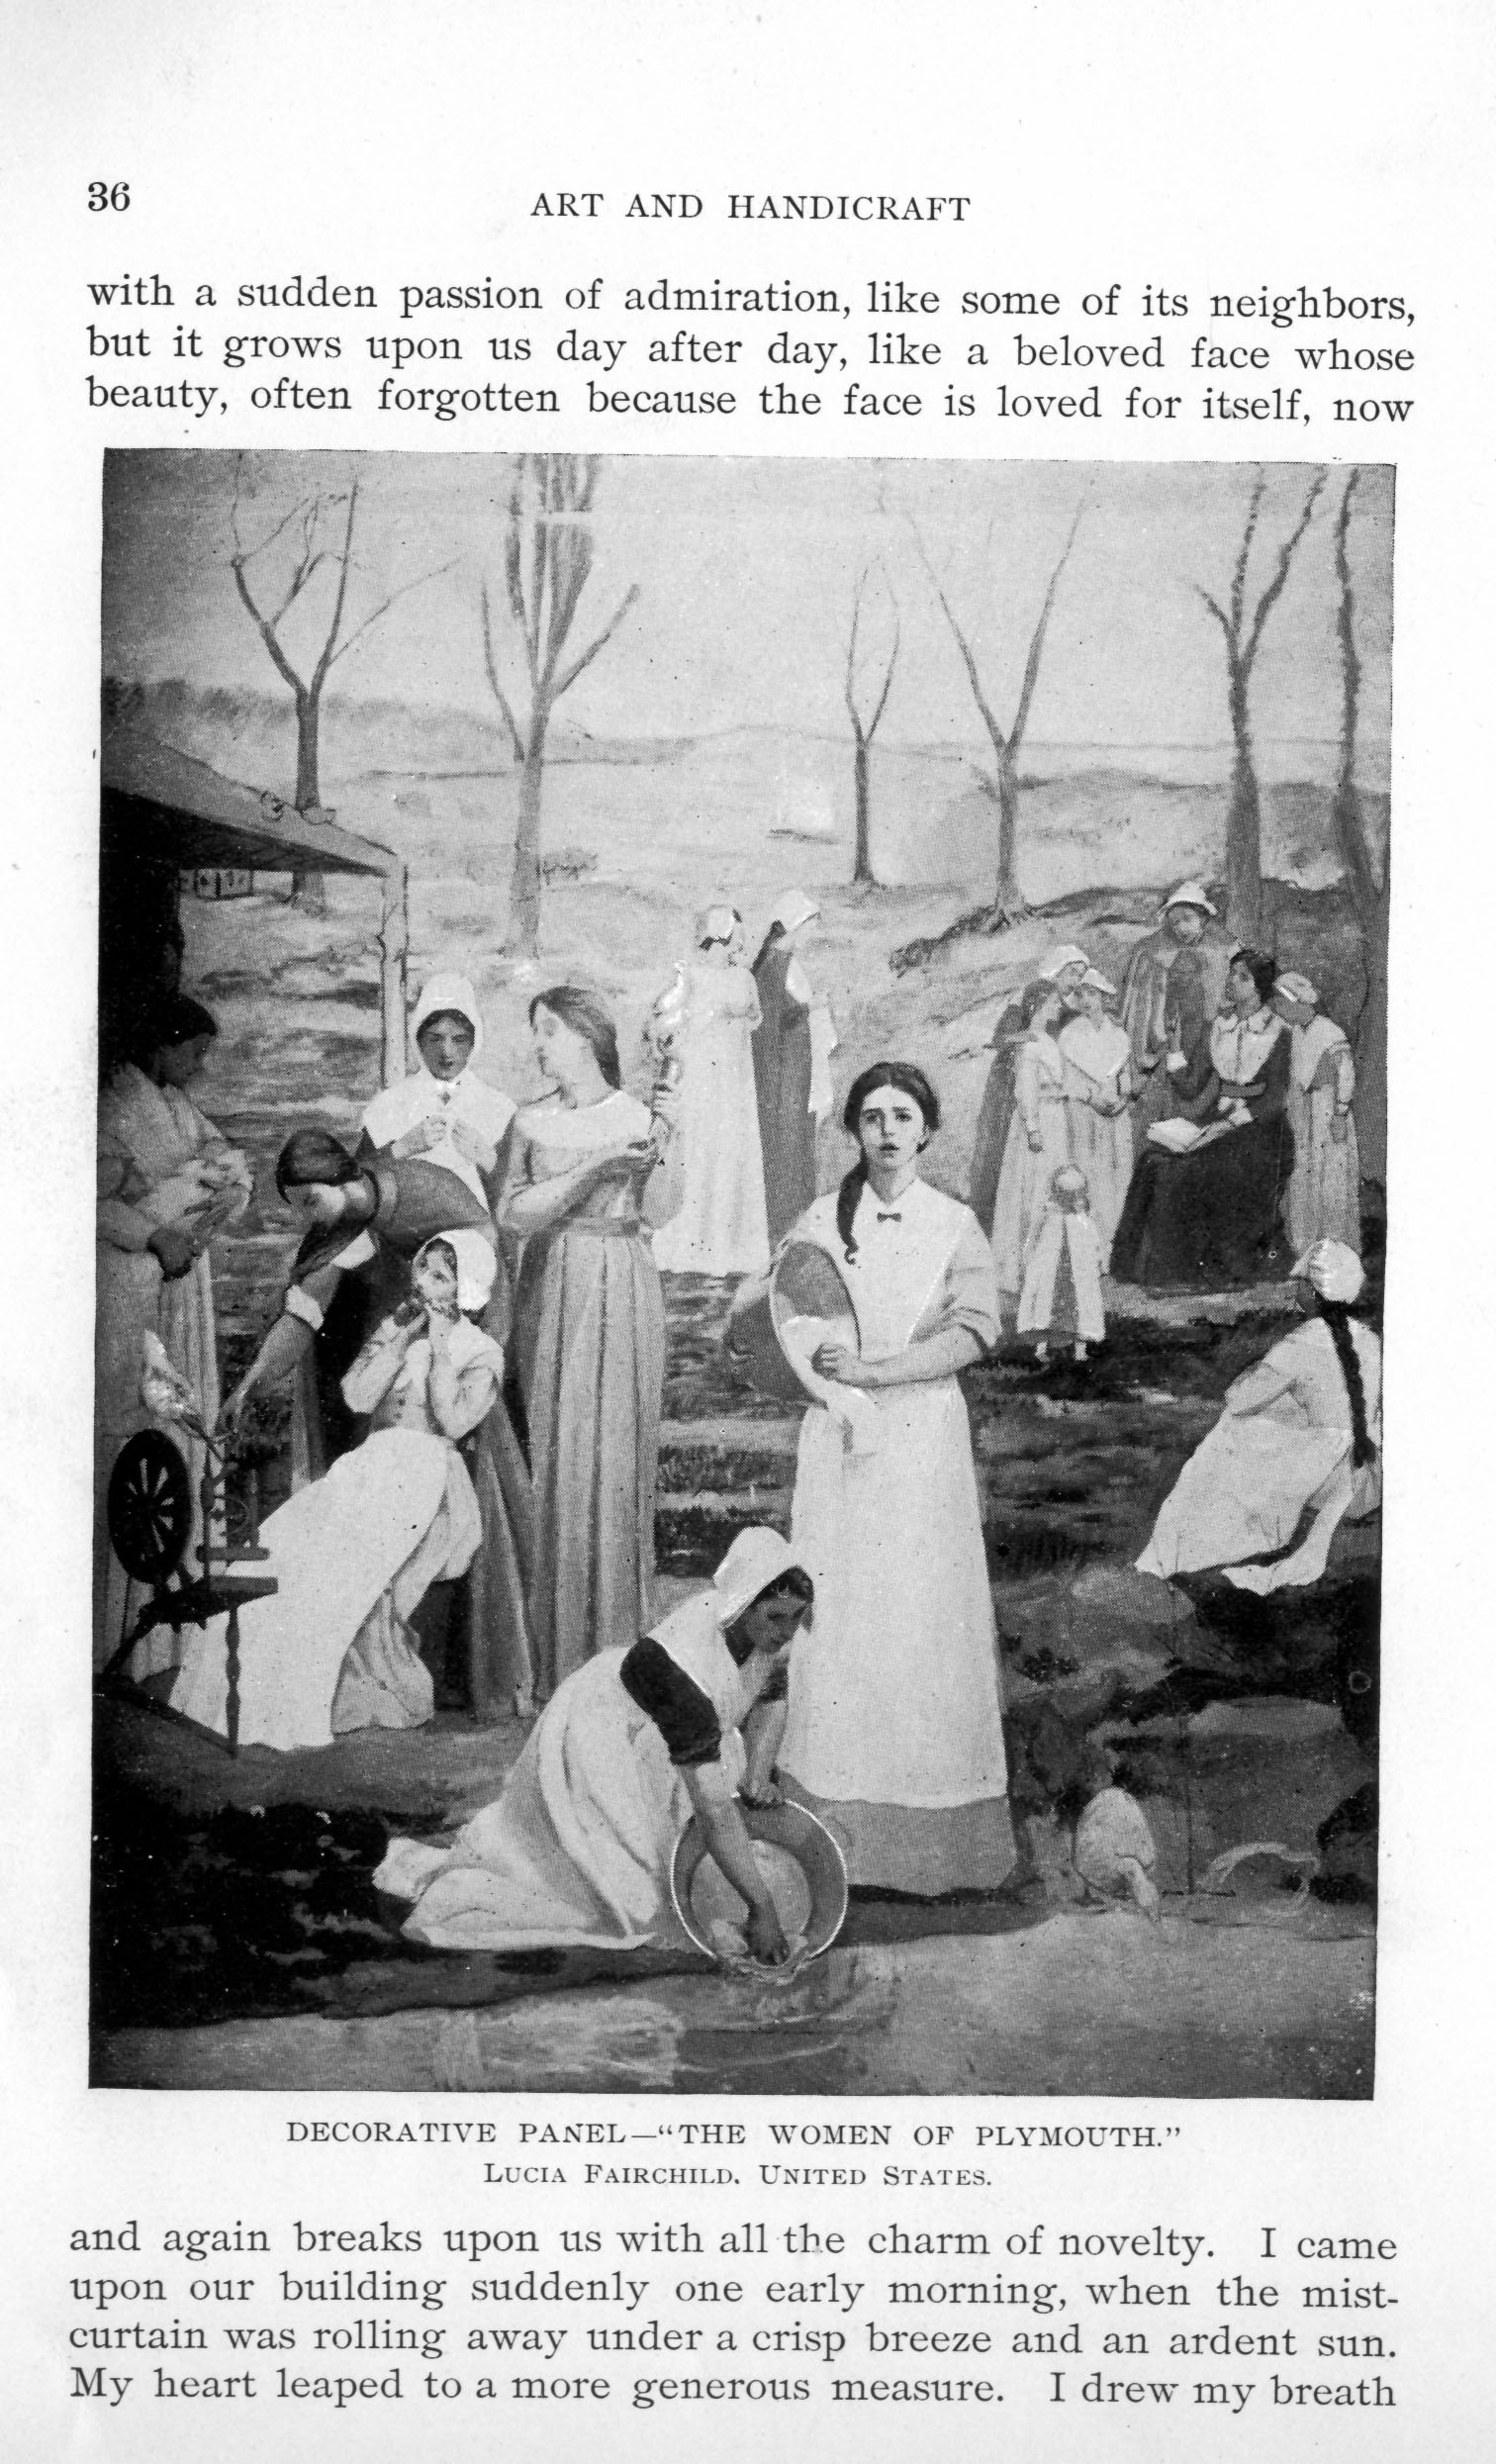 groups of women in pilgrim bonnets and aprons, talking, spinning, and washing clothes in a river